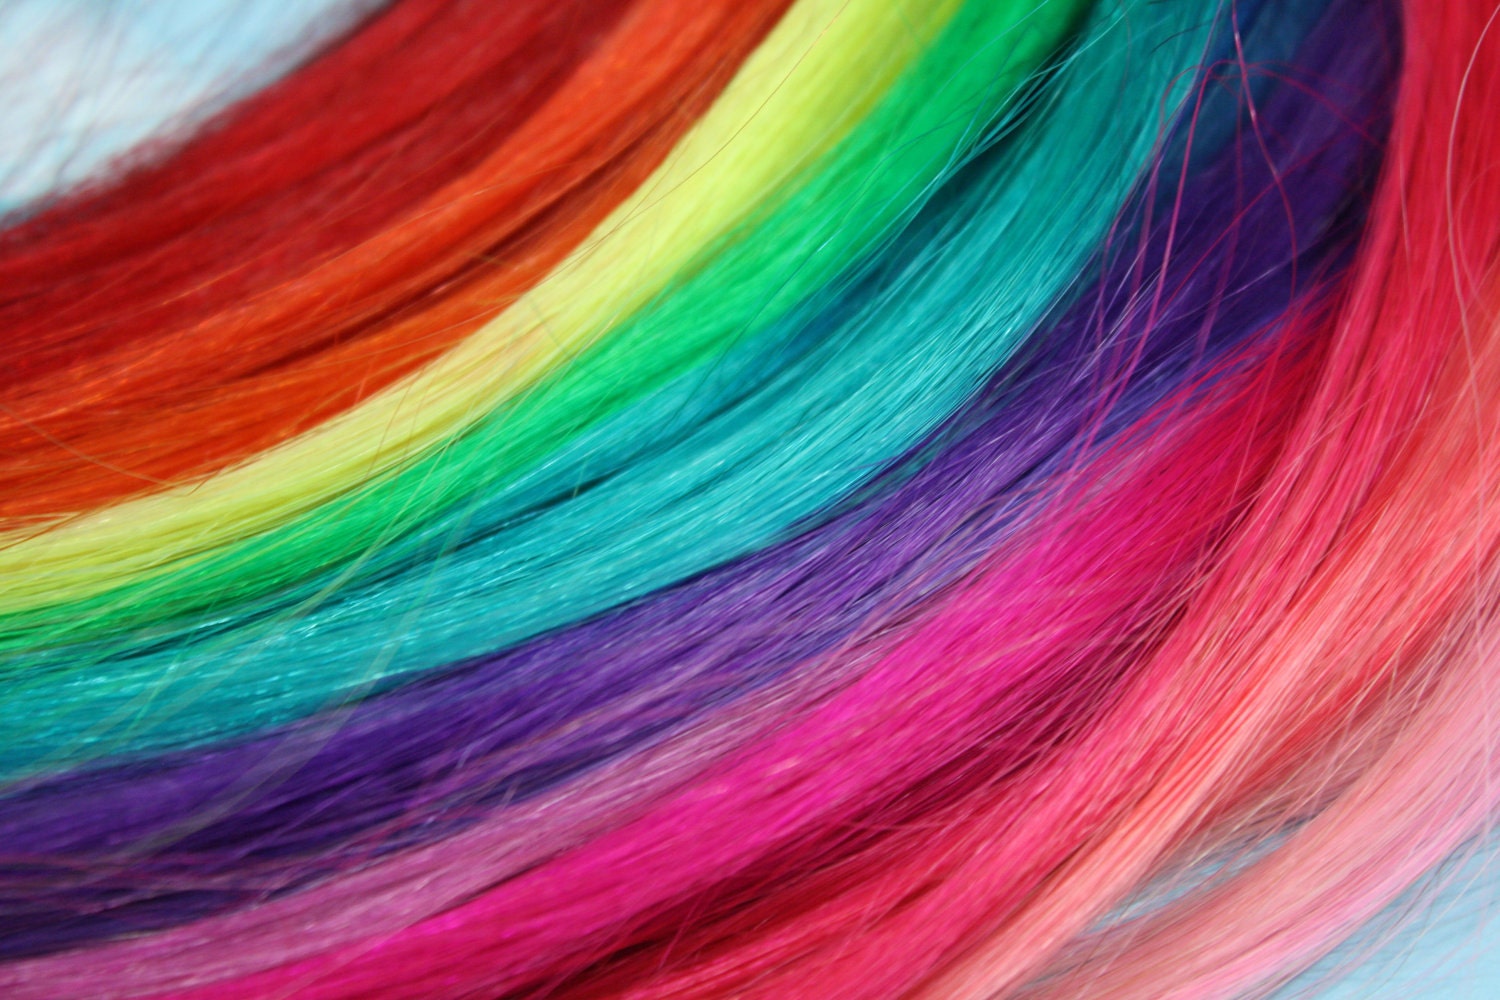 rainbow hair extensions human colored dye dyed dip colors colorful colours wefts extension clip pieces pastel extentions order amazing tie